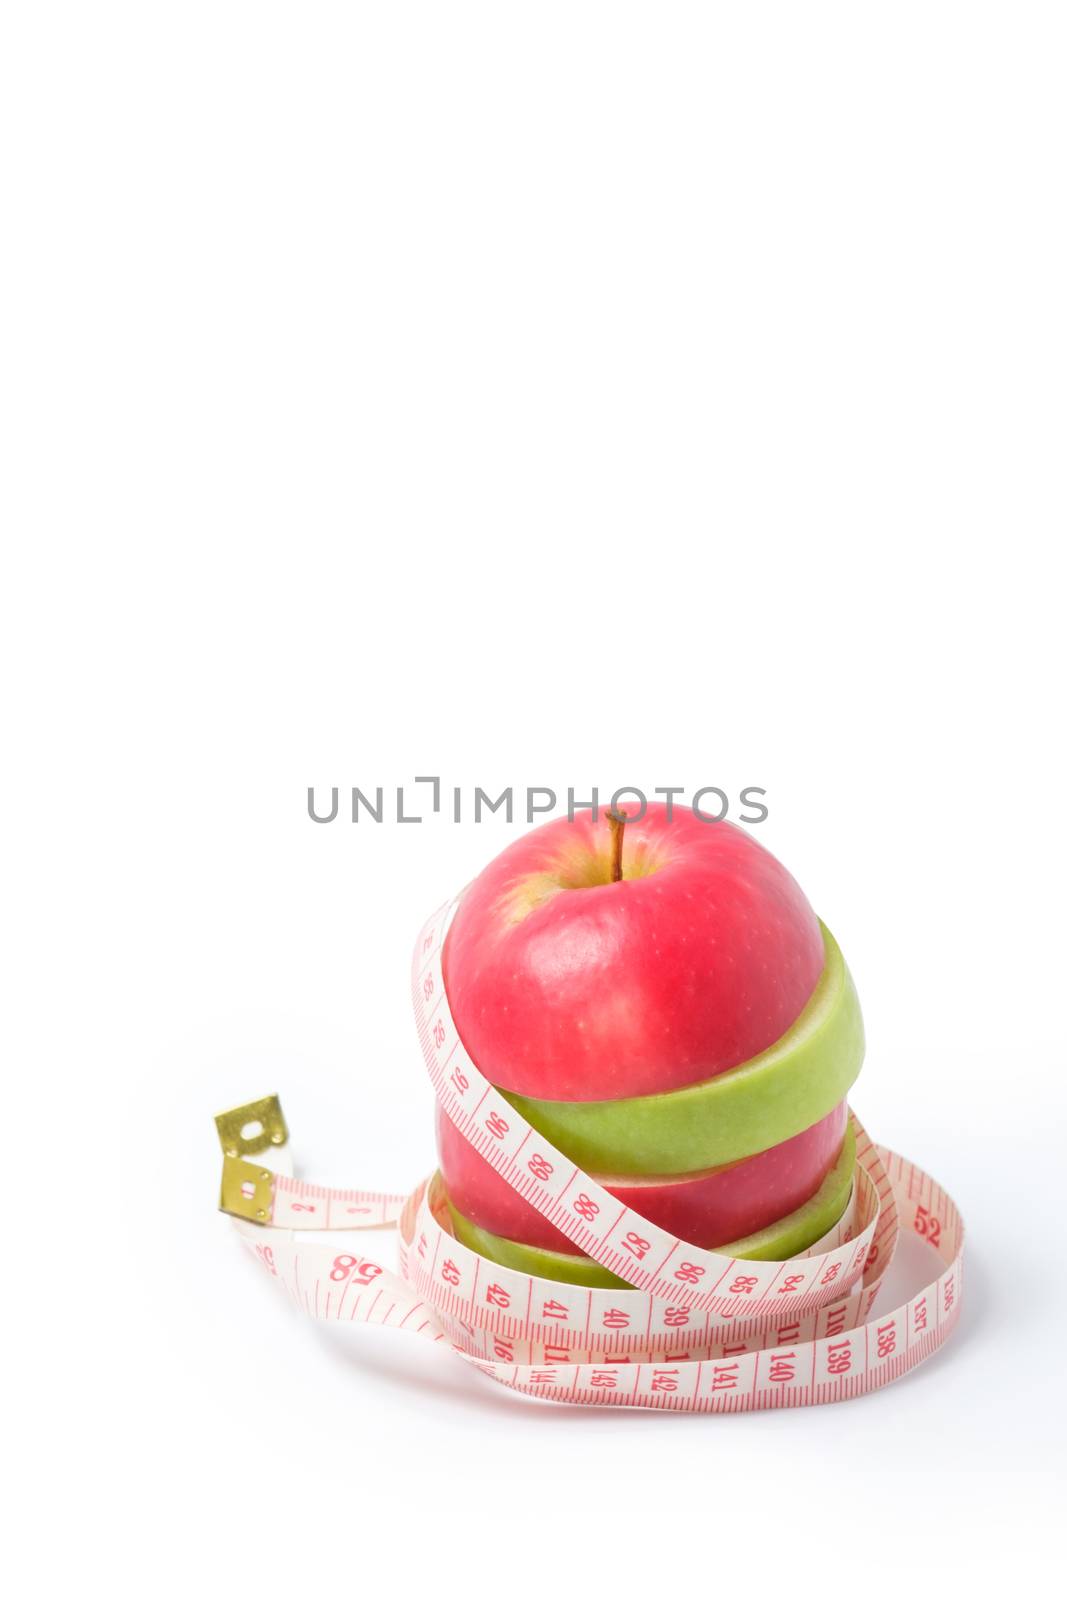 slice red and green apples with waist measure on white background. space for adding your text.
